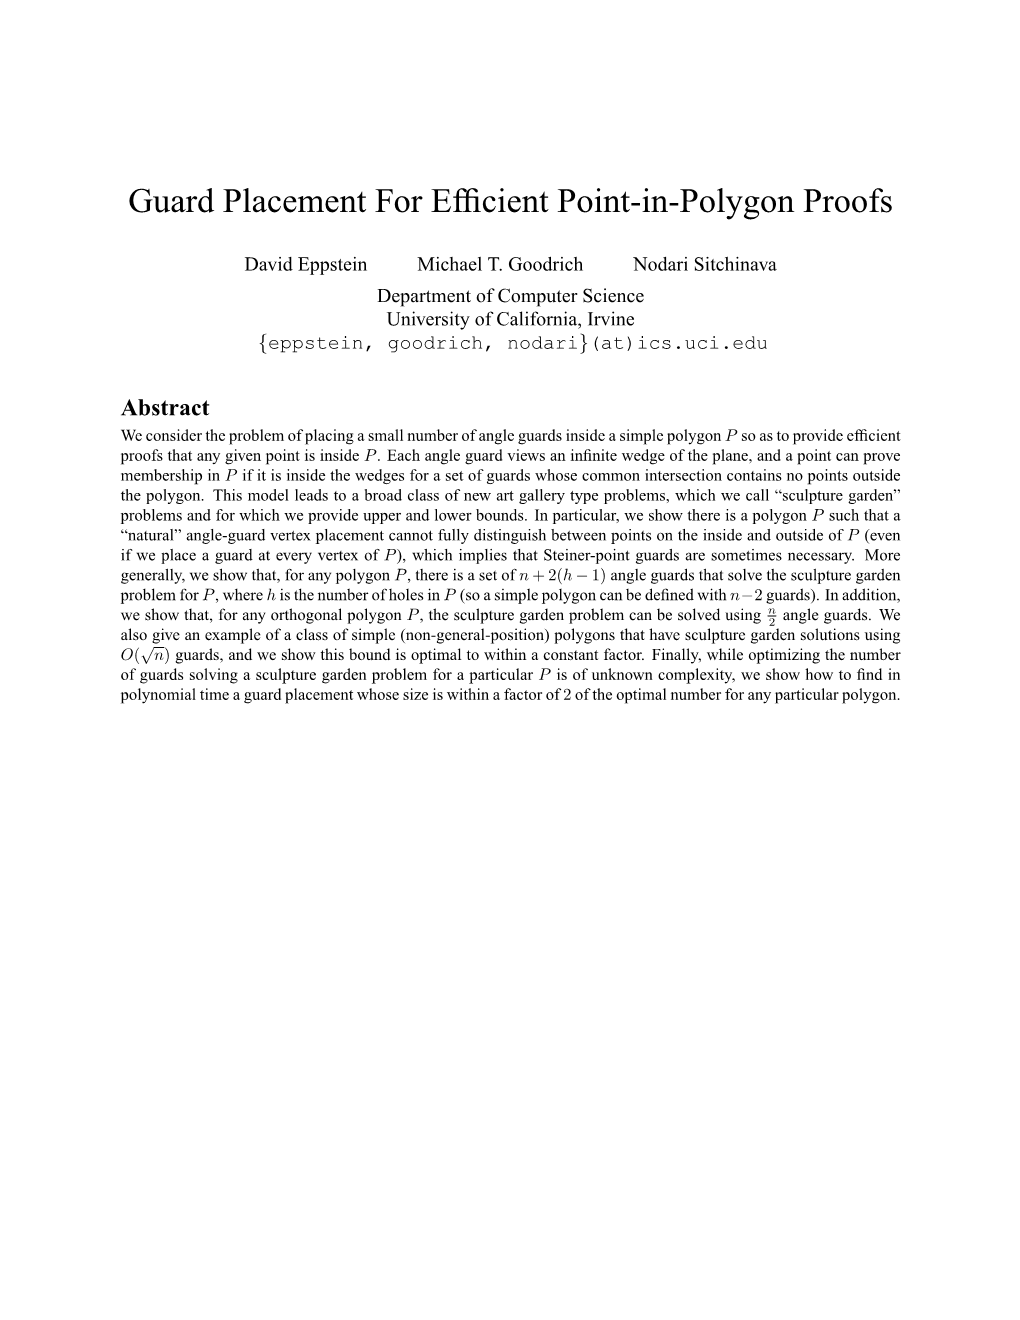 Guard Placement for Efficient Point-In-Polygon Proofs